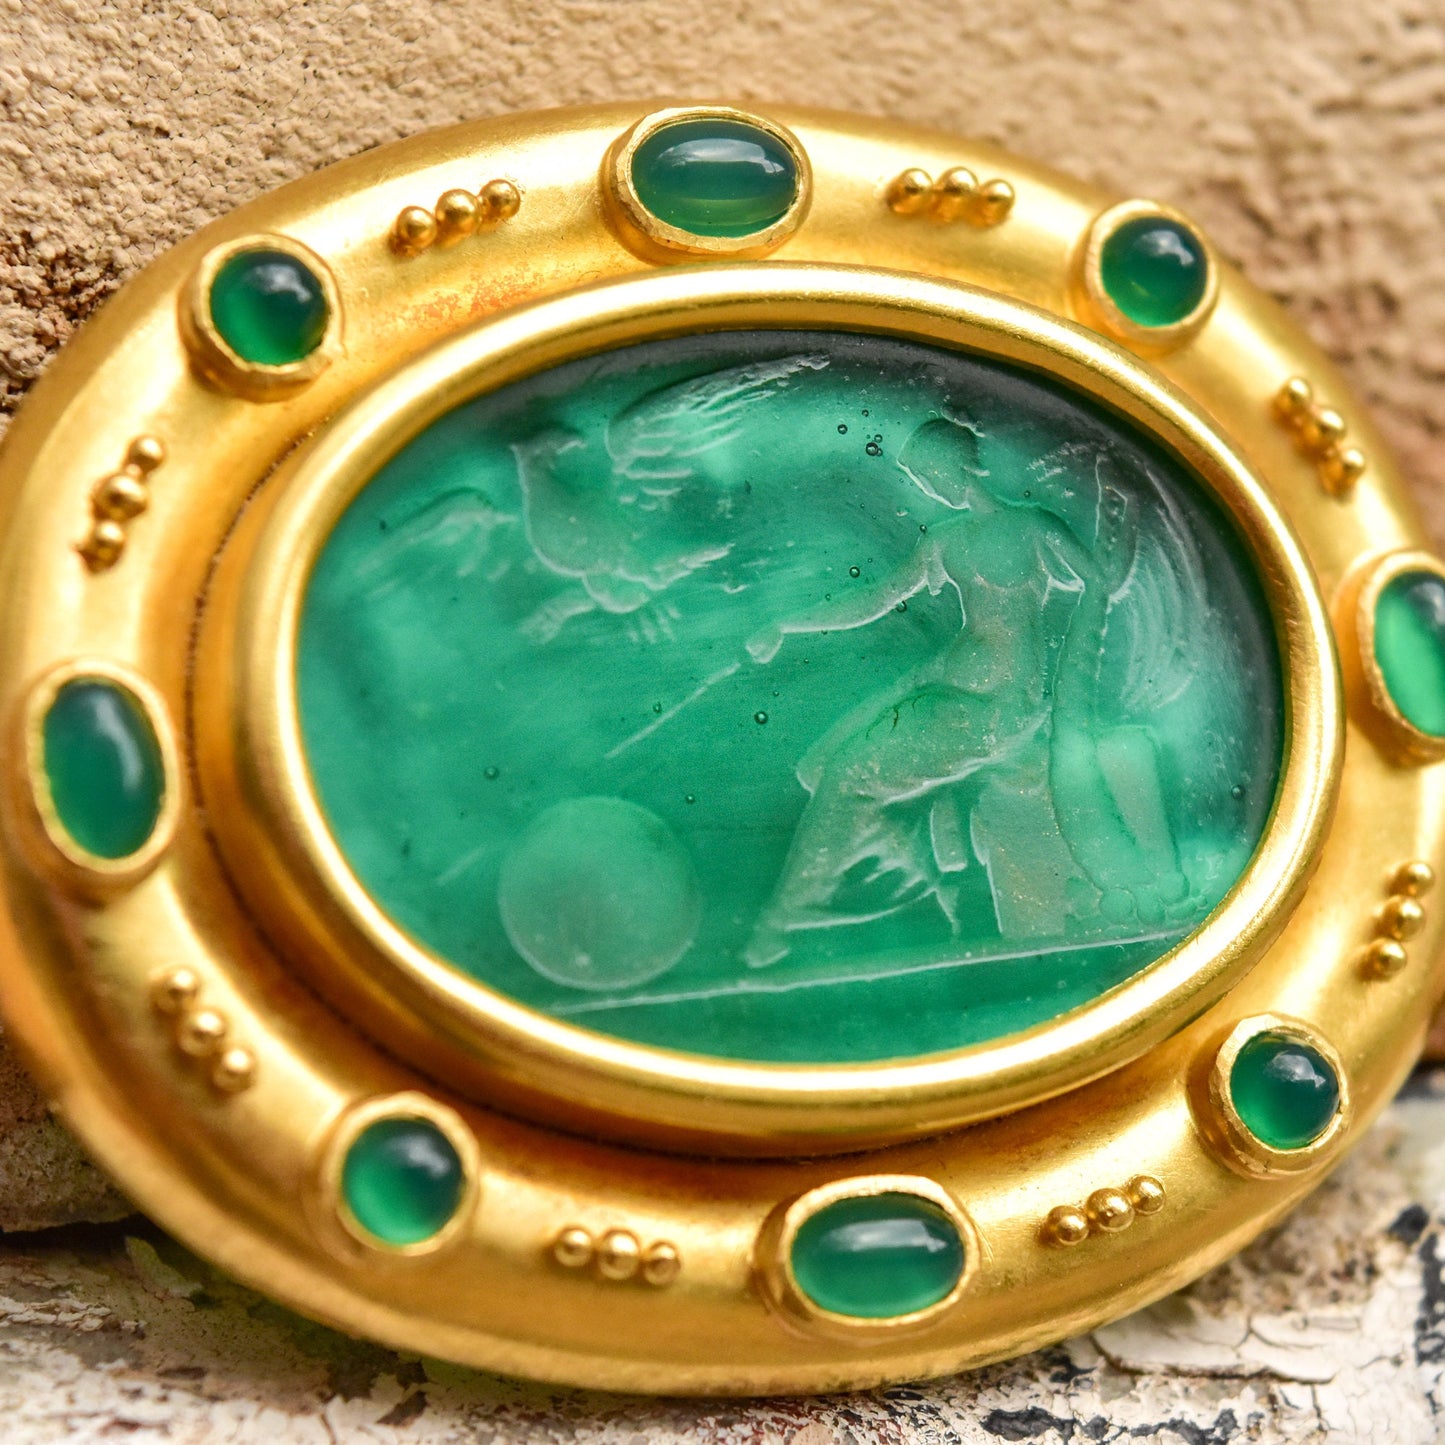 18K gold brooch pendant featuring an oval carved green Venetian glass intaglio center with mother of pearl backing accented by cabochon emeralds, fine jewelry design by Elizabeth Locke.